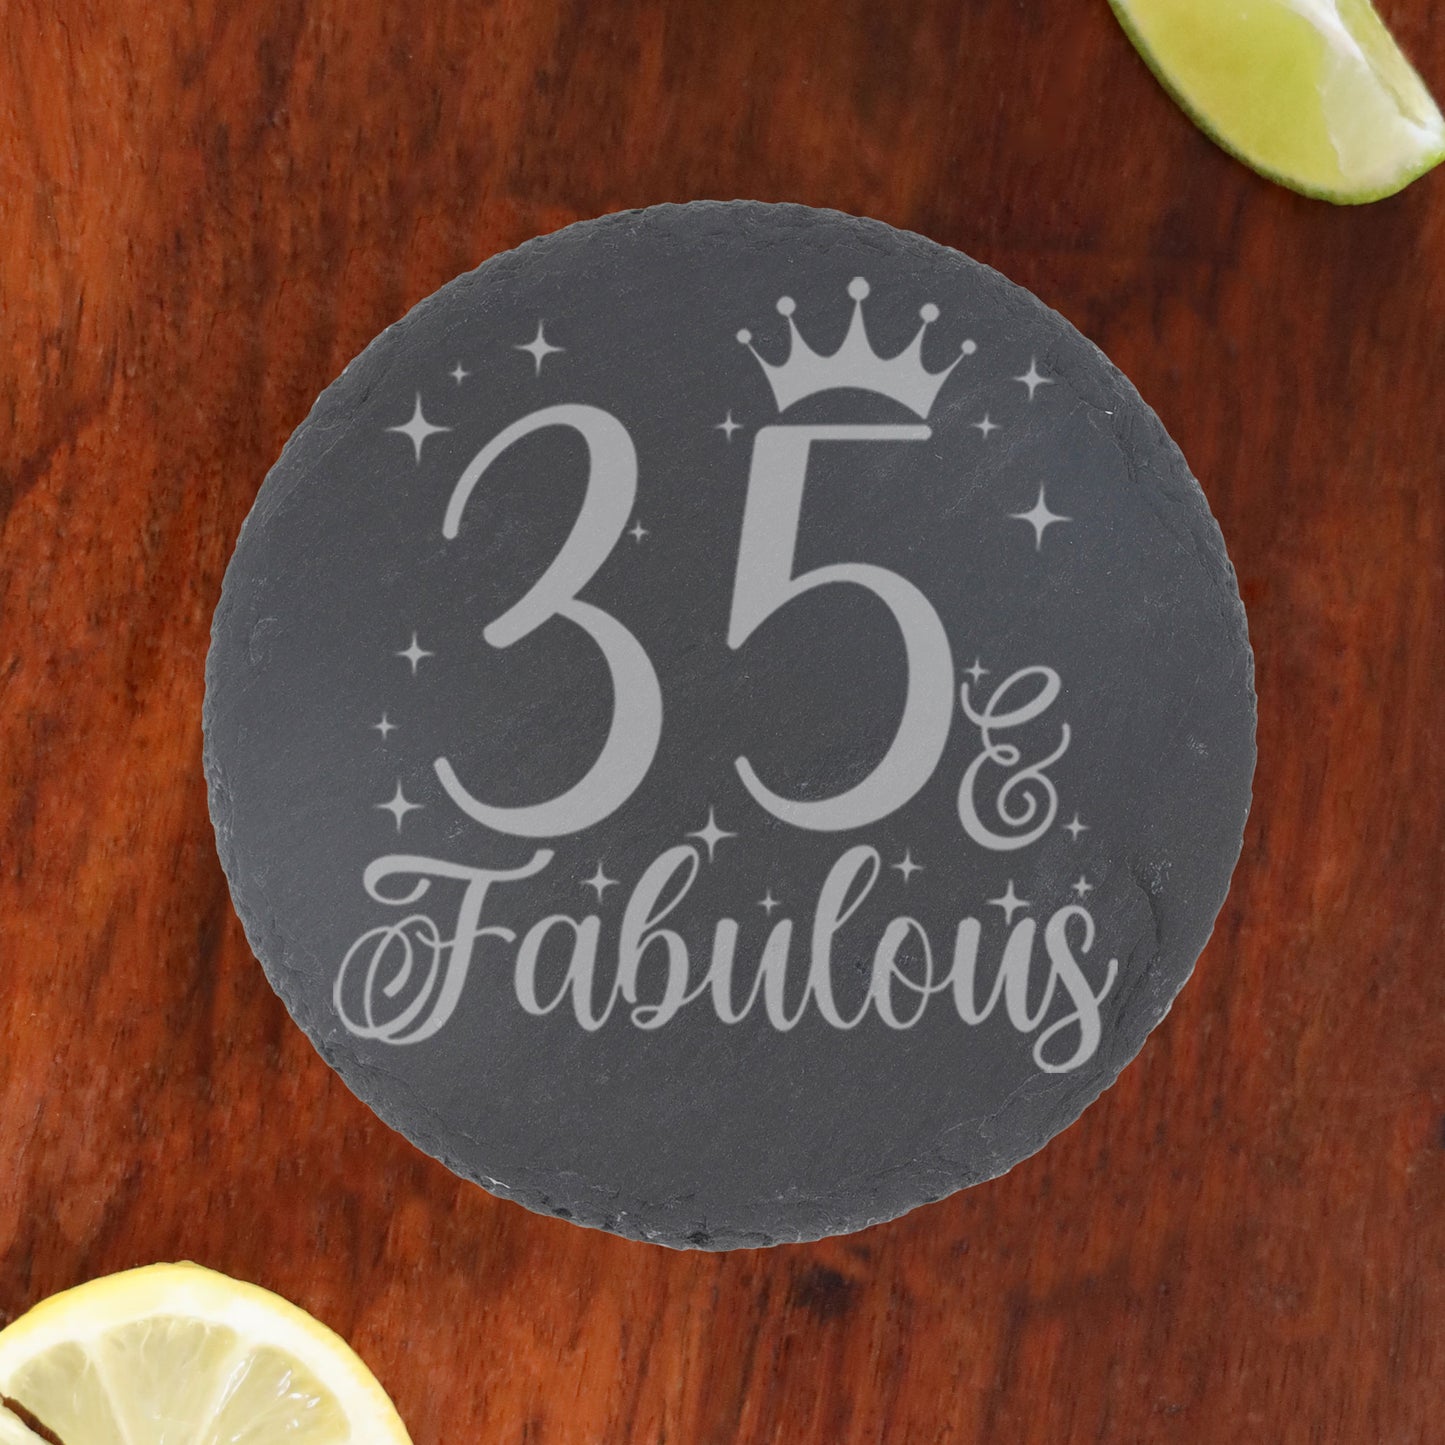 35 & Fabulous 35th Birthday Gift Engraved Wine Glass and/or Coaster Set  - Always Looking Good - Round Coaster Only  